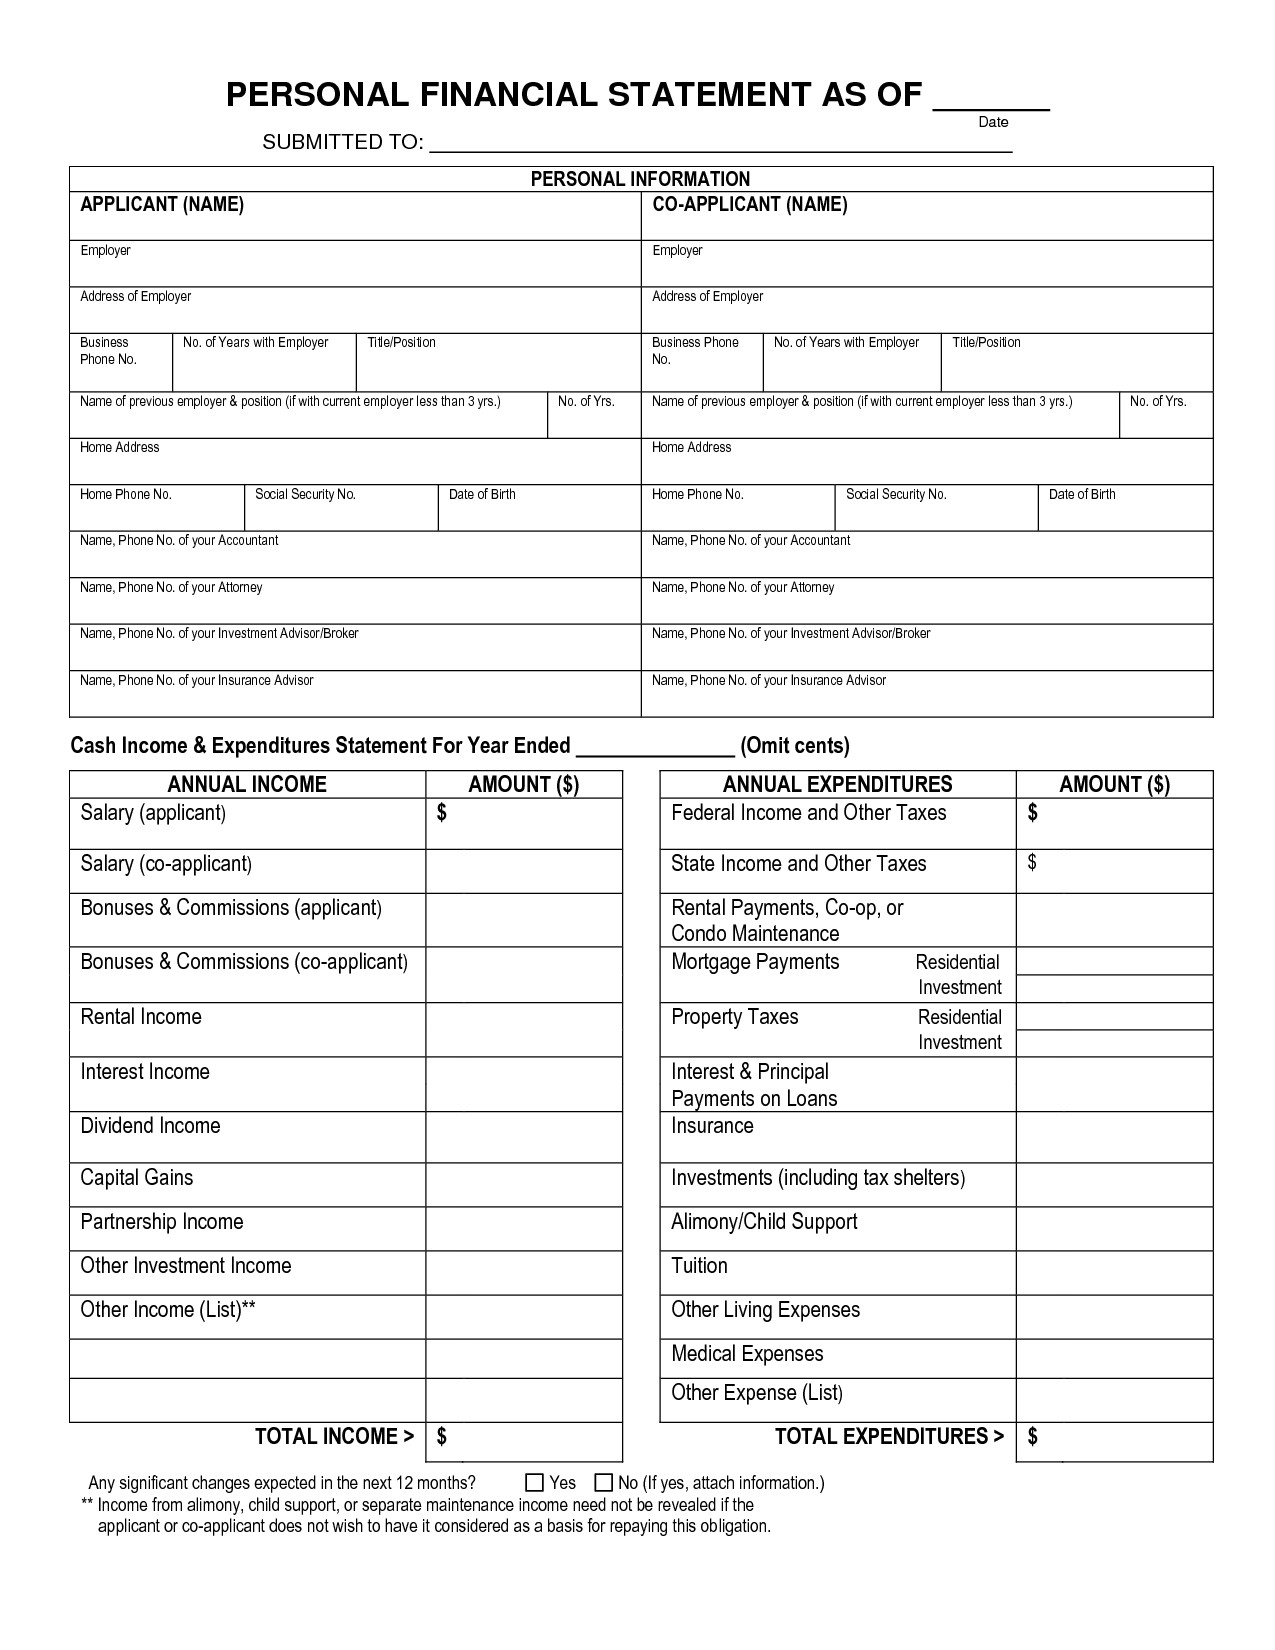 Blank Personal Financial Statement Free Printable Personal Financial Statement